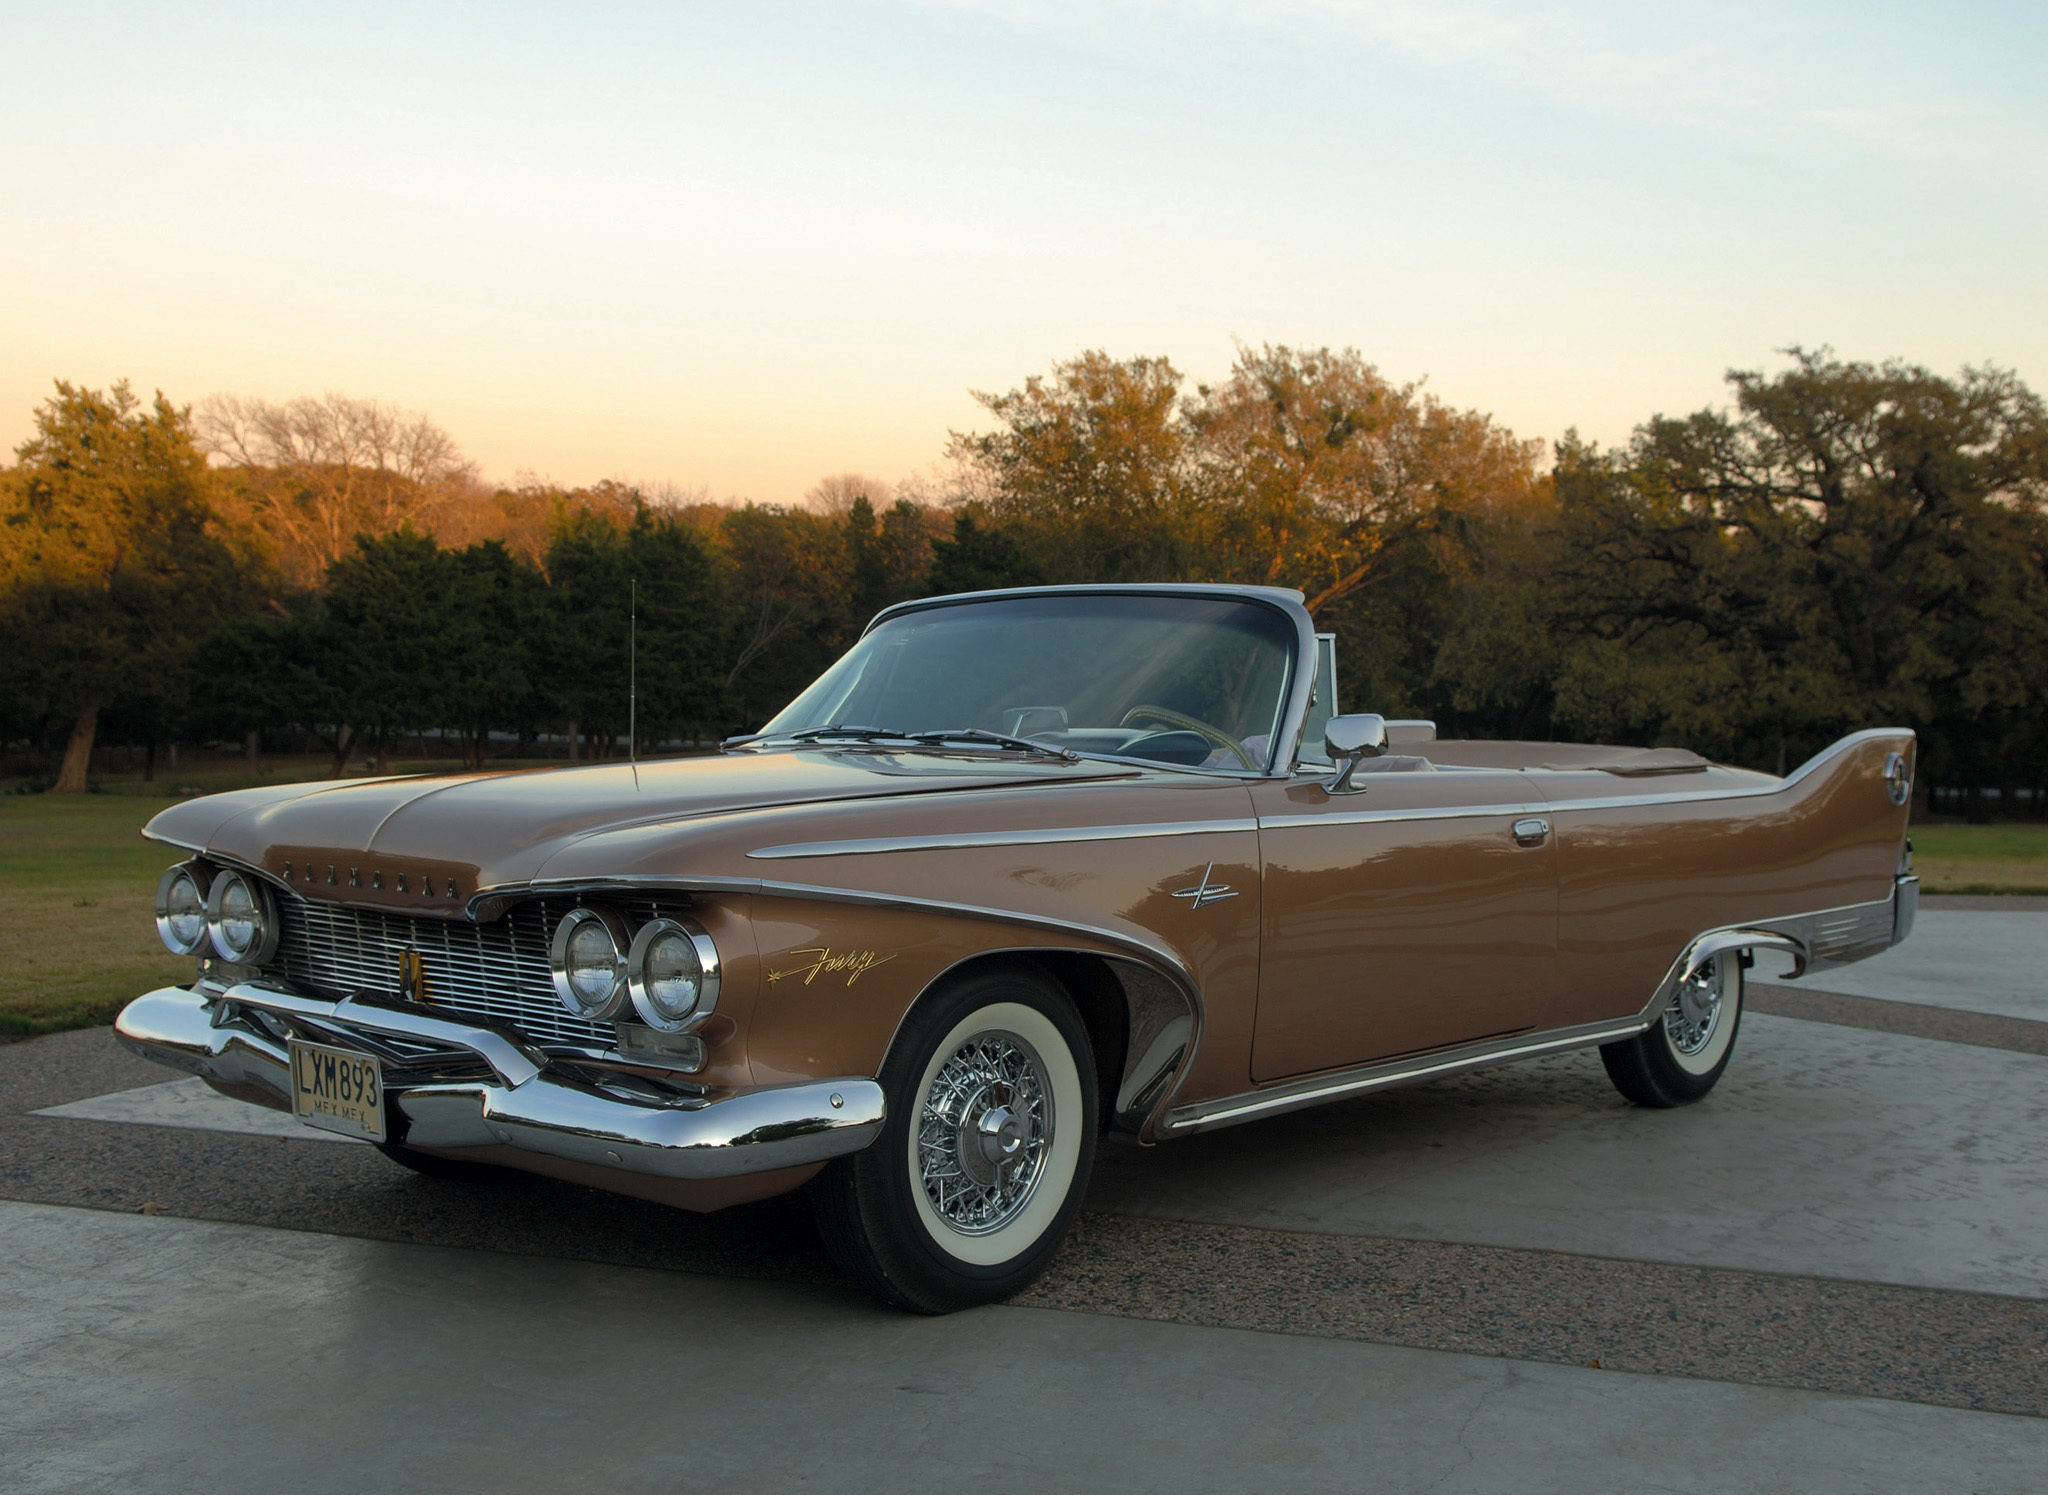 1960 Plymouth Fury Convertible, Plymouth, Plymouth Fury